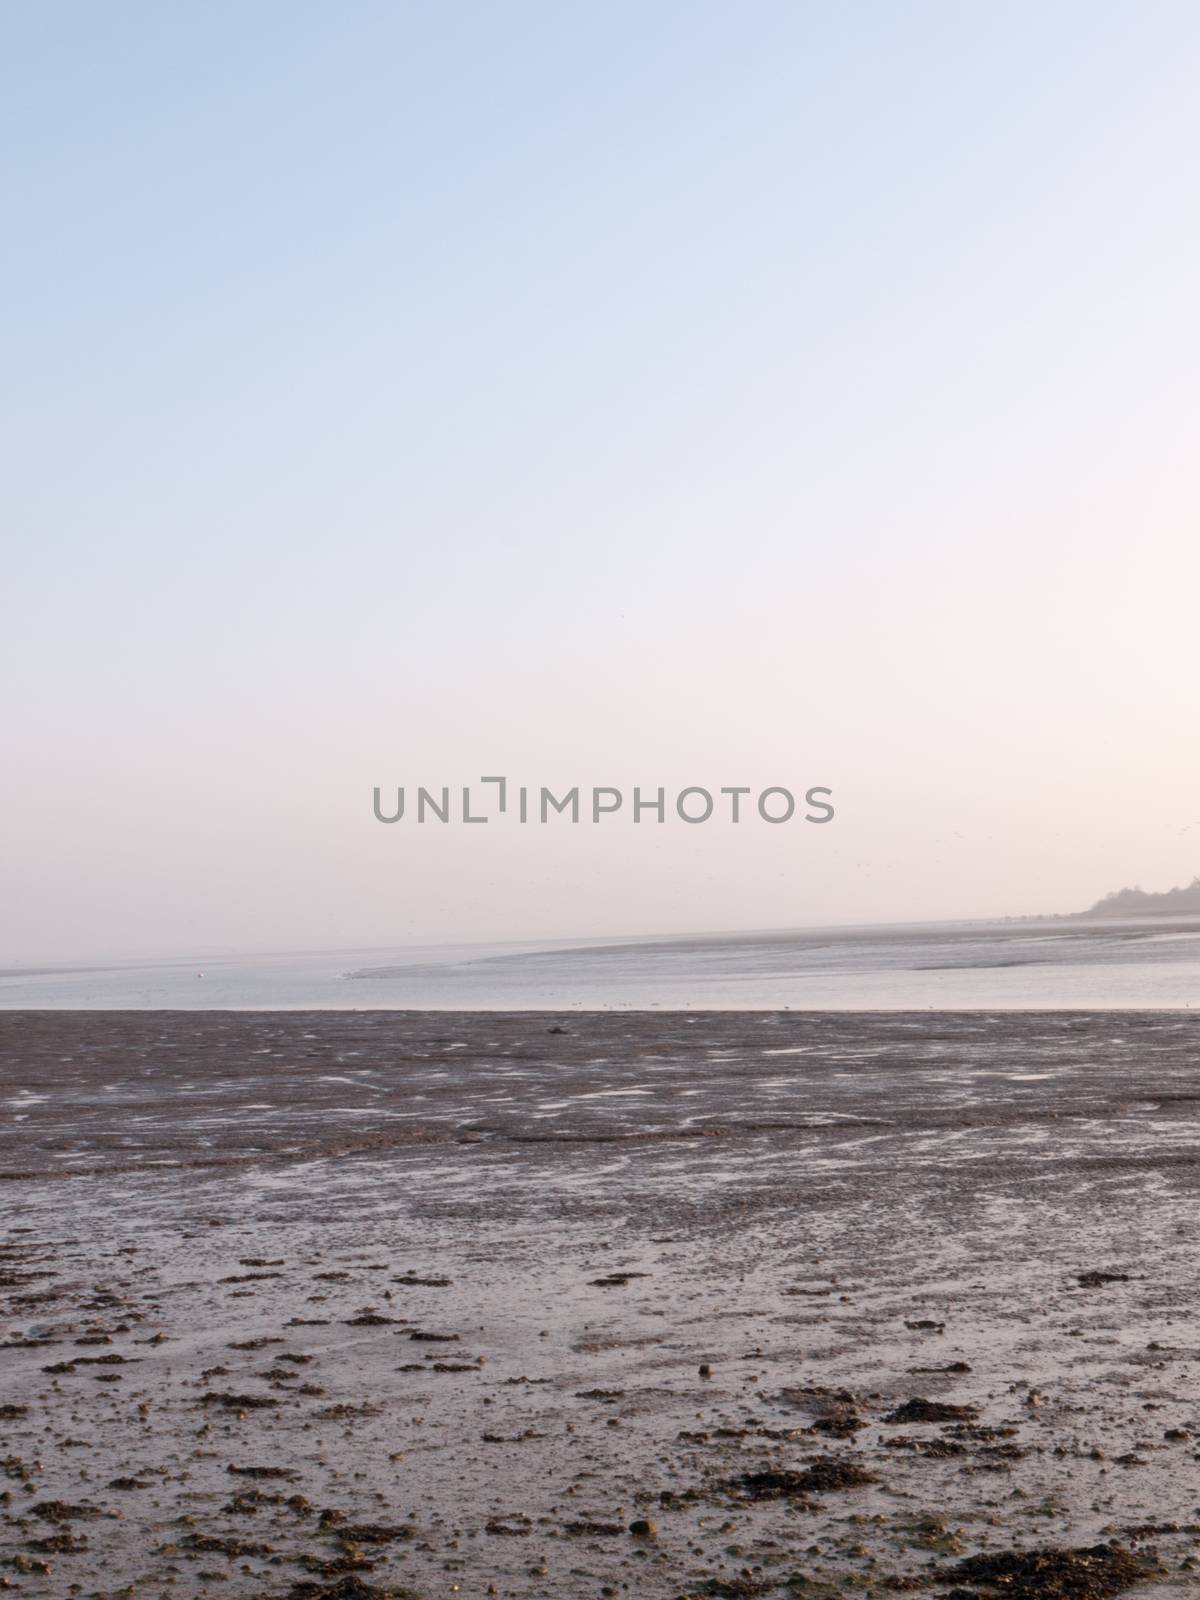 Incredibly Beautiful Shots of the River Beds in Wivenhoe Essex a by callumrc